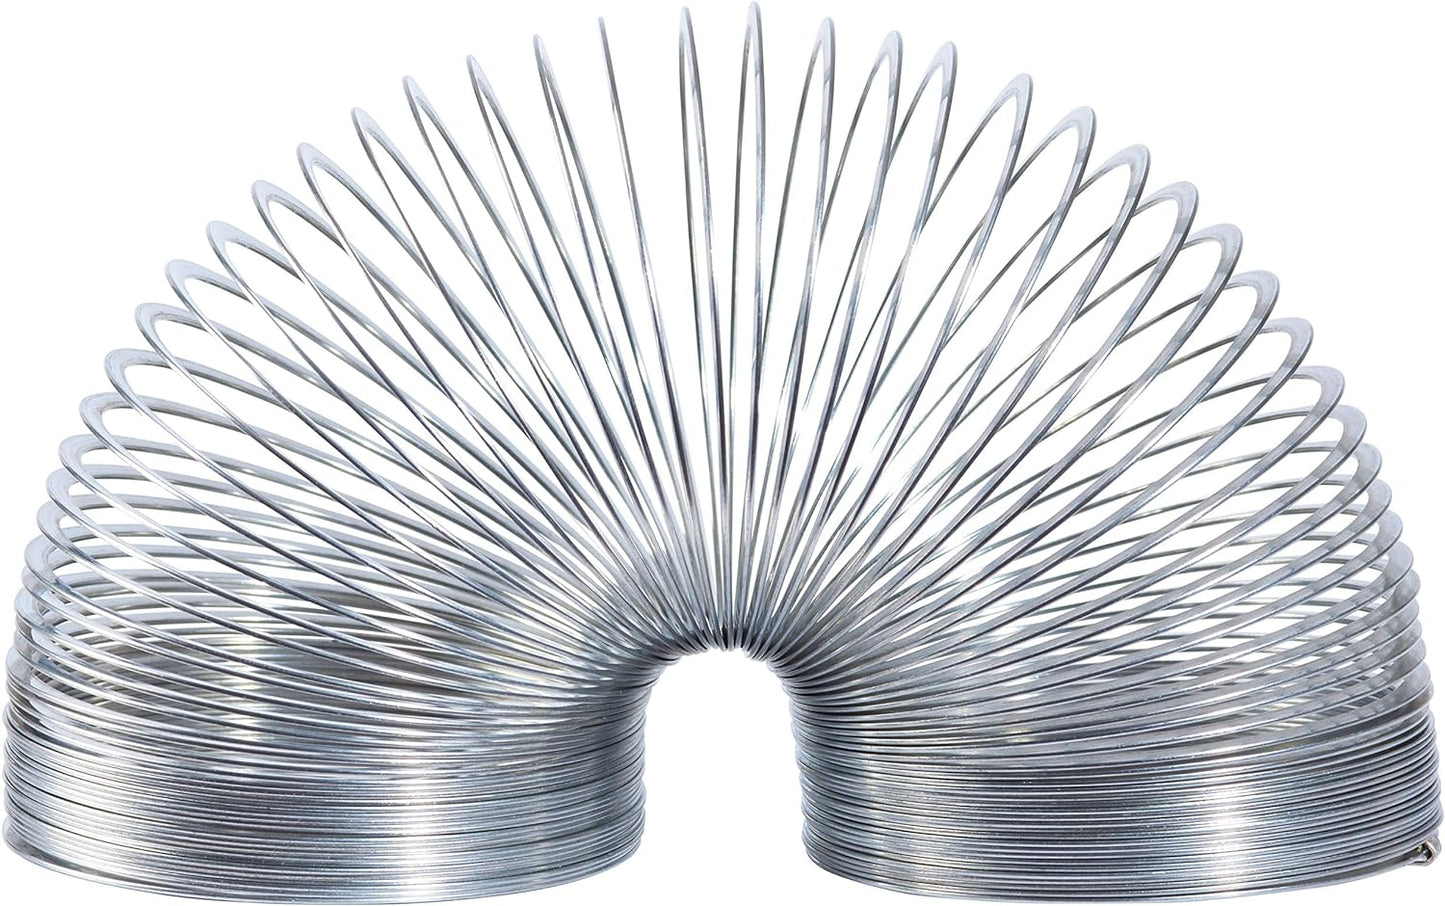 UniitesMarketplace.com™, The Original Slinky Walking Spring Toy, Metal Slinky, Fidget Toys, Kids Toys for Ages 5 Up by Just Play, $2.91